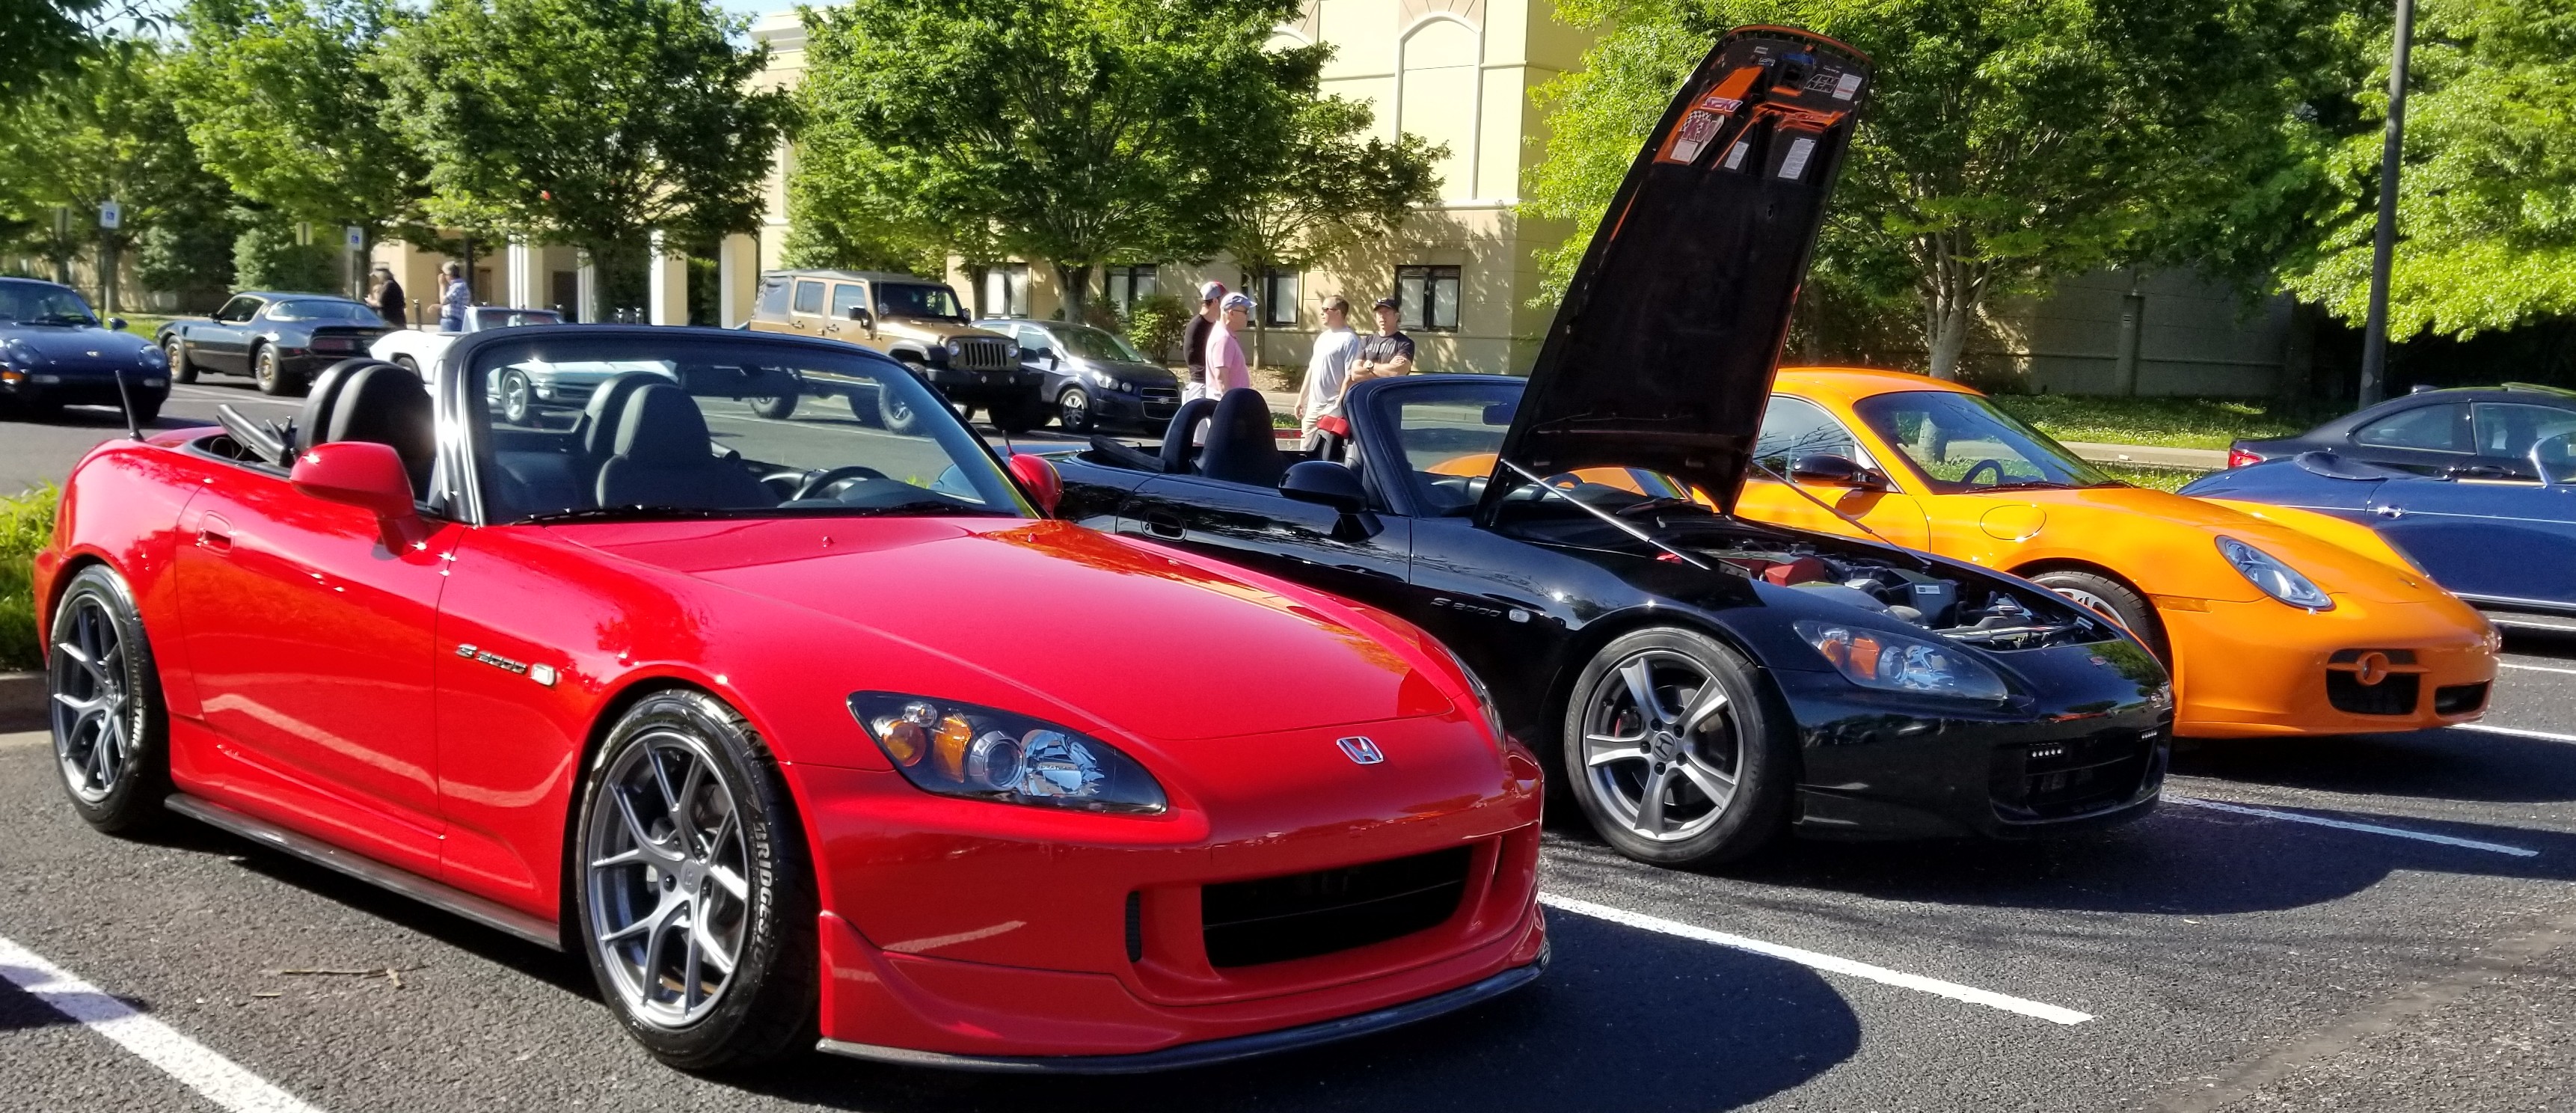 Cars And Coffee Nashville Nashville Cars And Coffee 11 2 2013